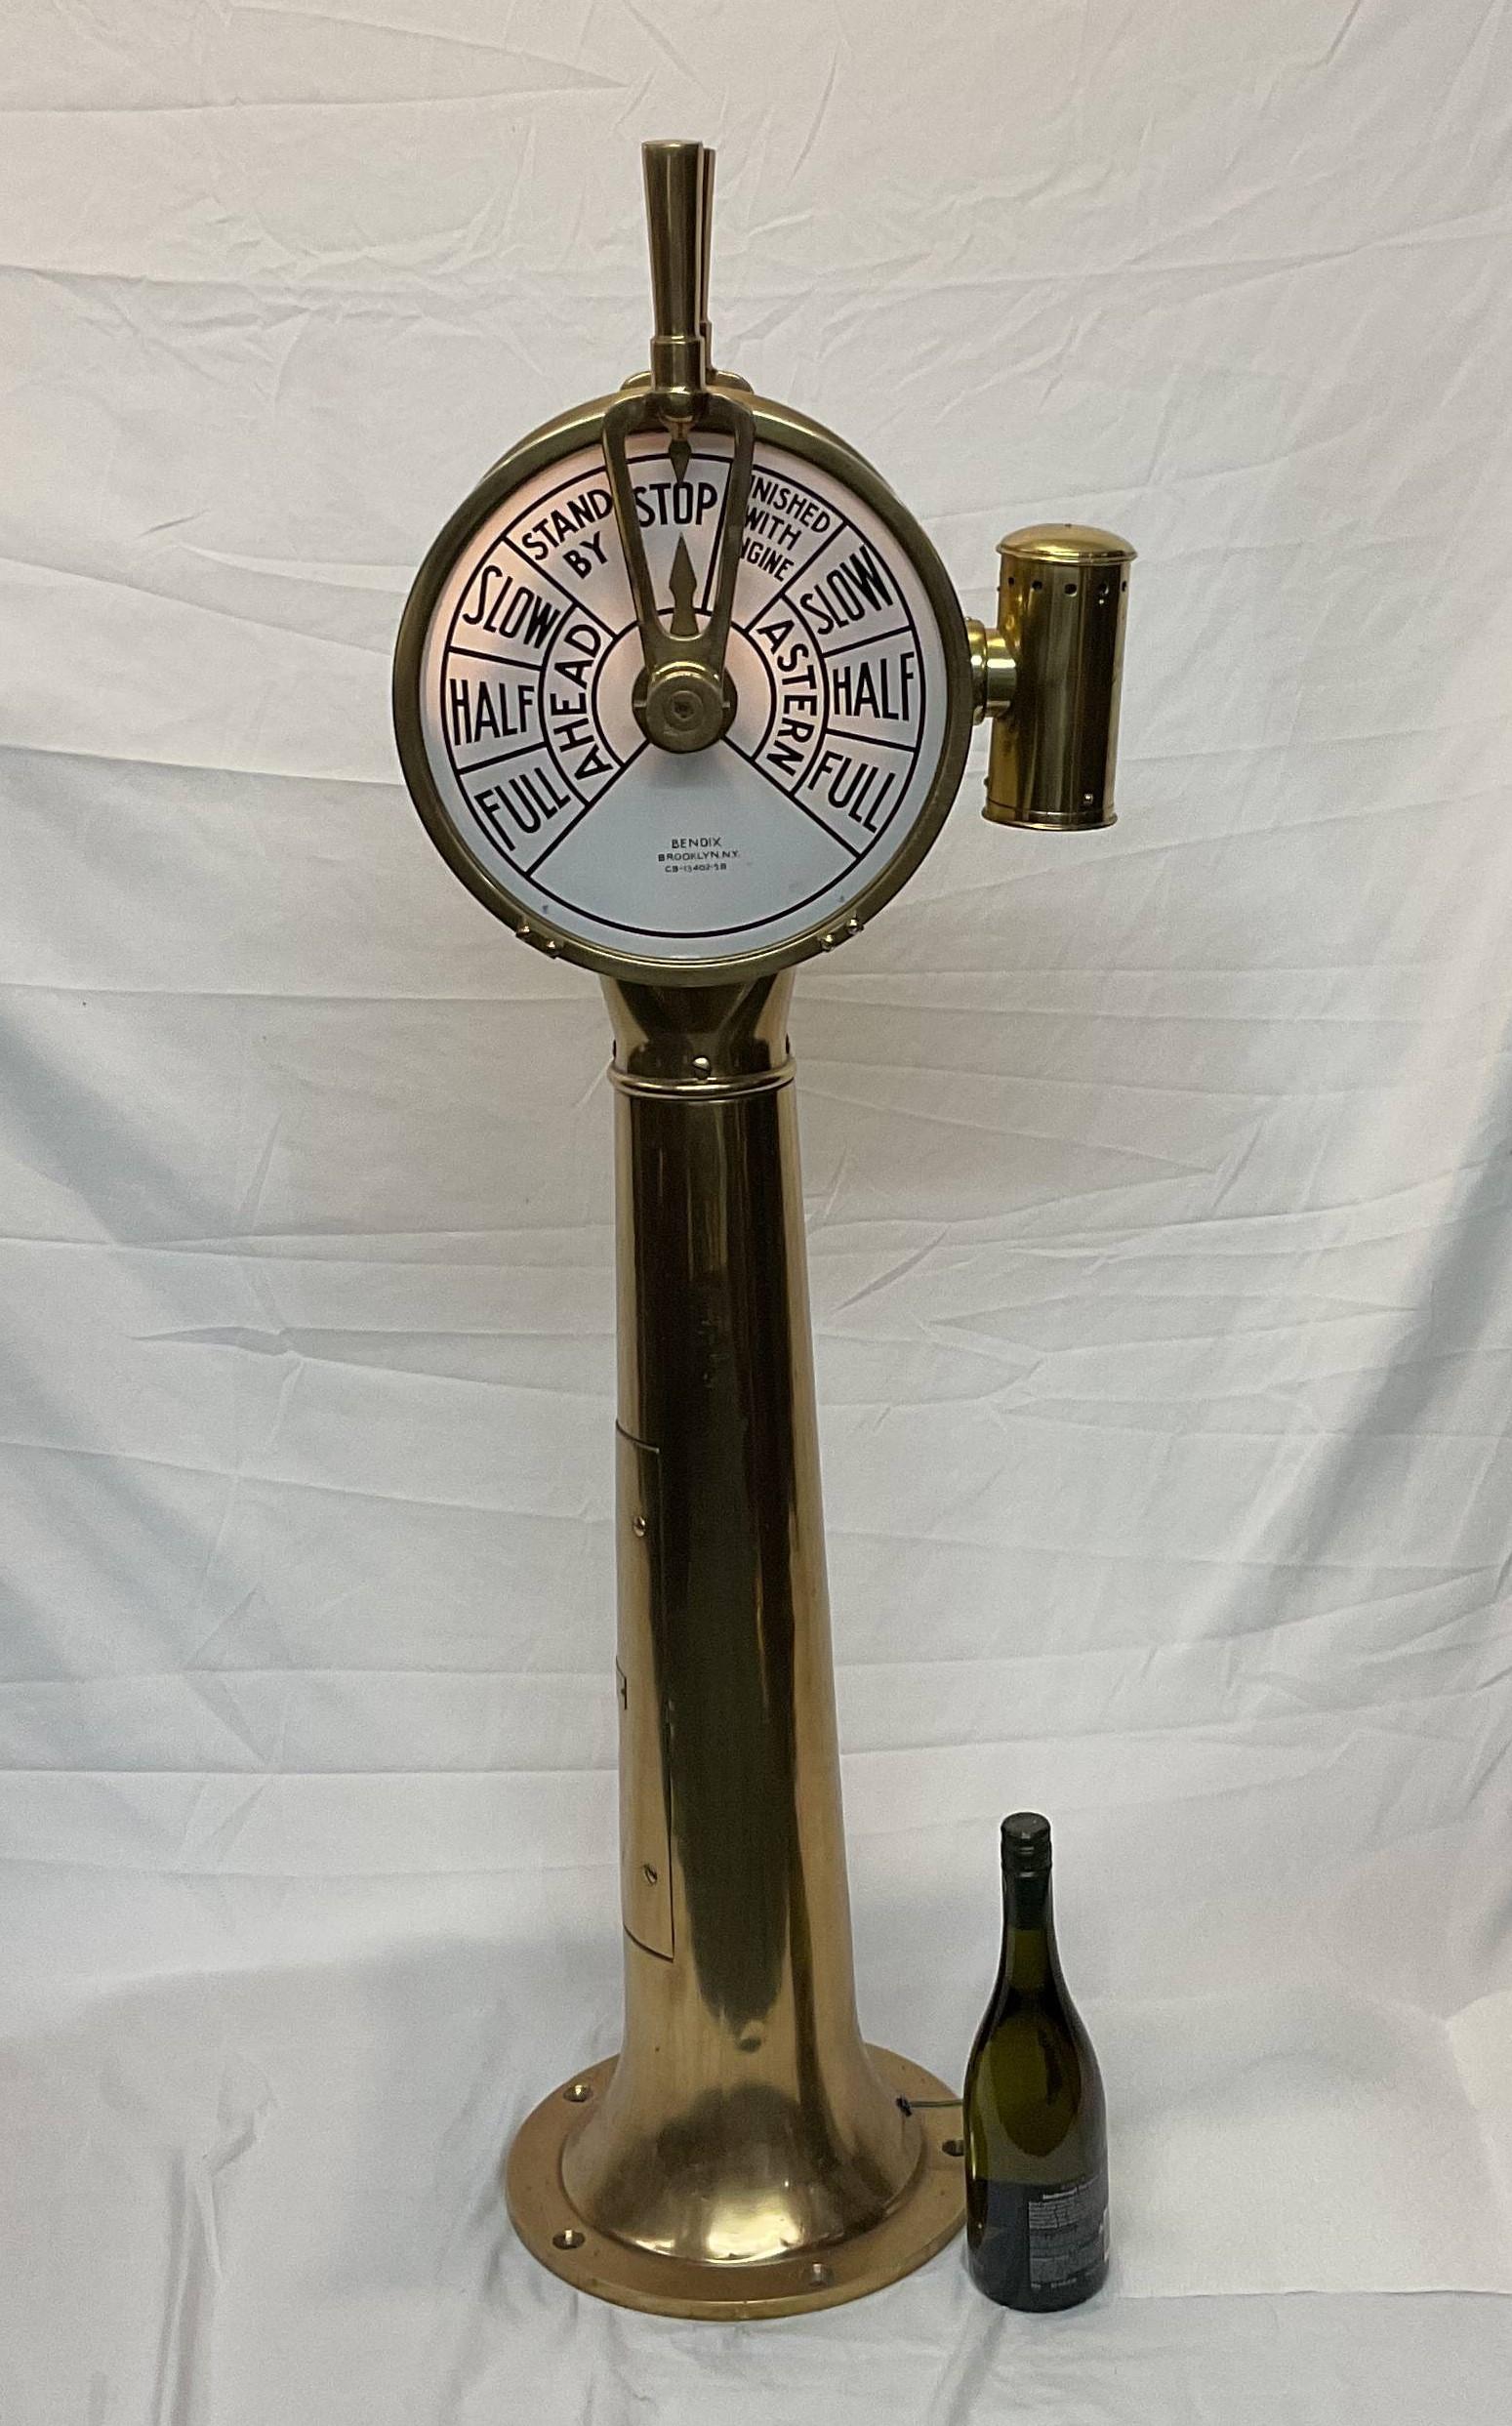 Polished brass ships engine order telegraph by Bendix of Brooklyn N.Y. Serial number CB-13402-5A is also shown. Ships commands slow, half, full, stop, astern and ahead are the displayed commands. Very nice condition. In nice old lacquer.

Weight: 96